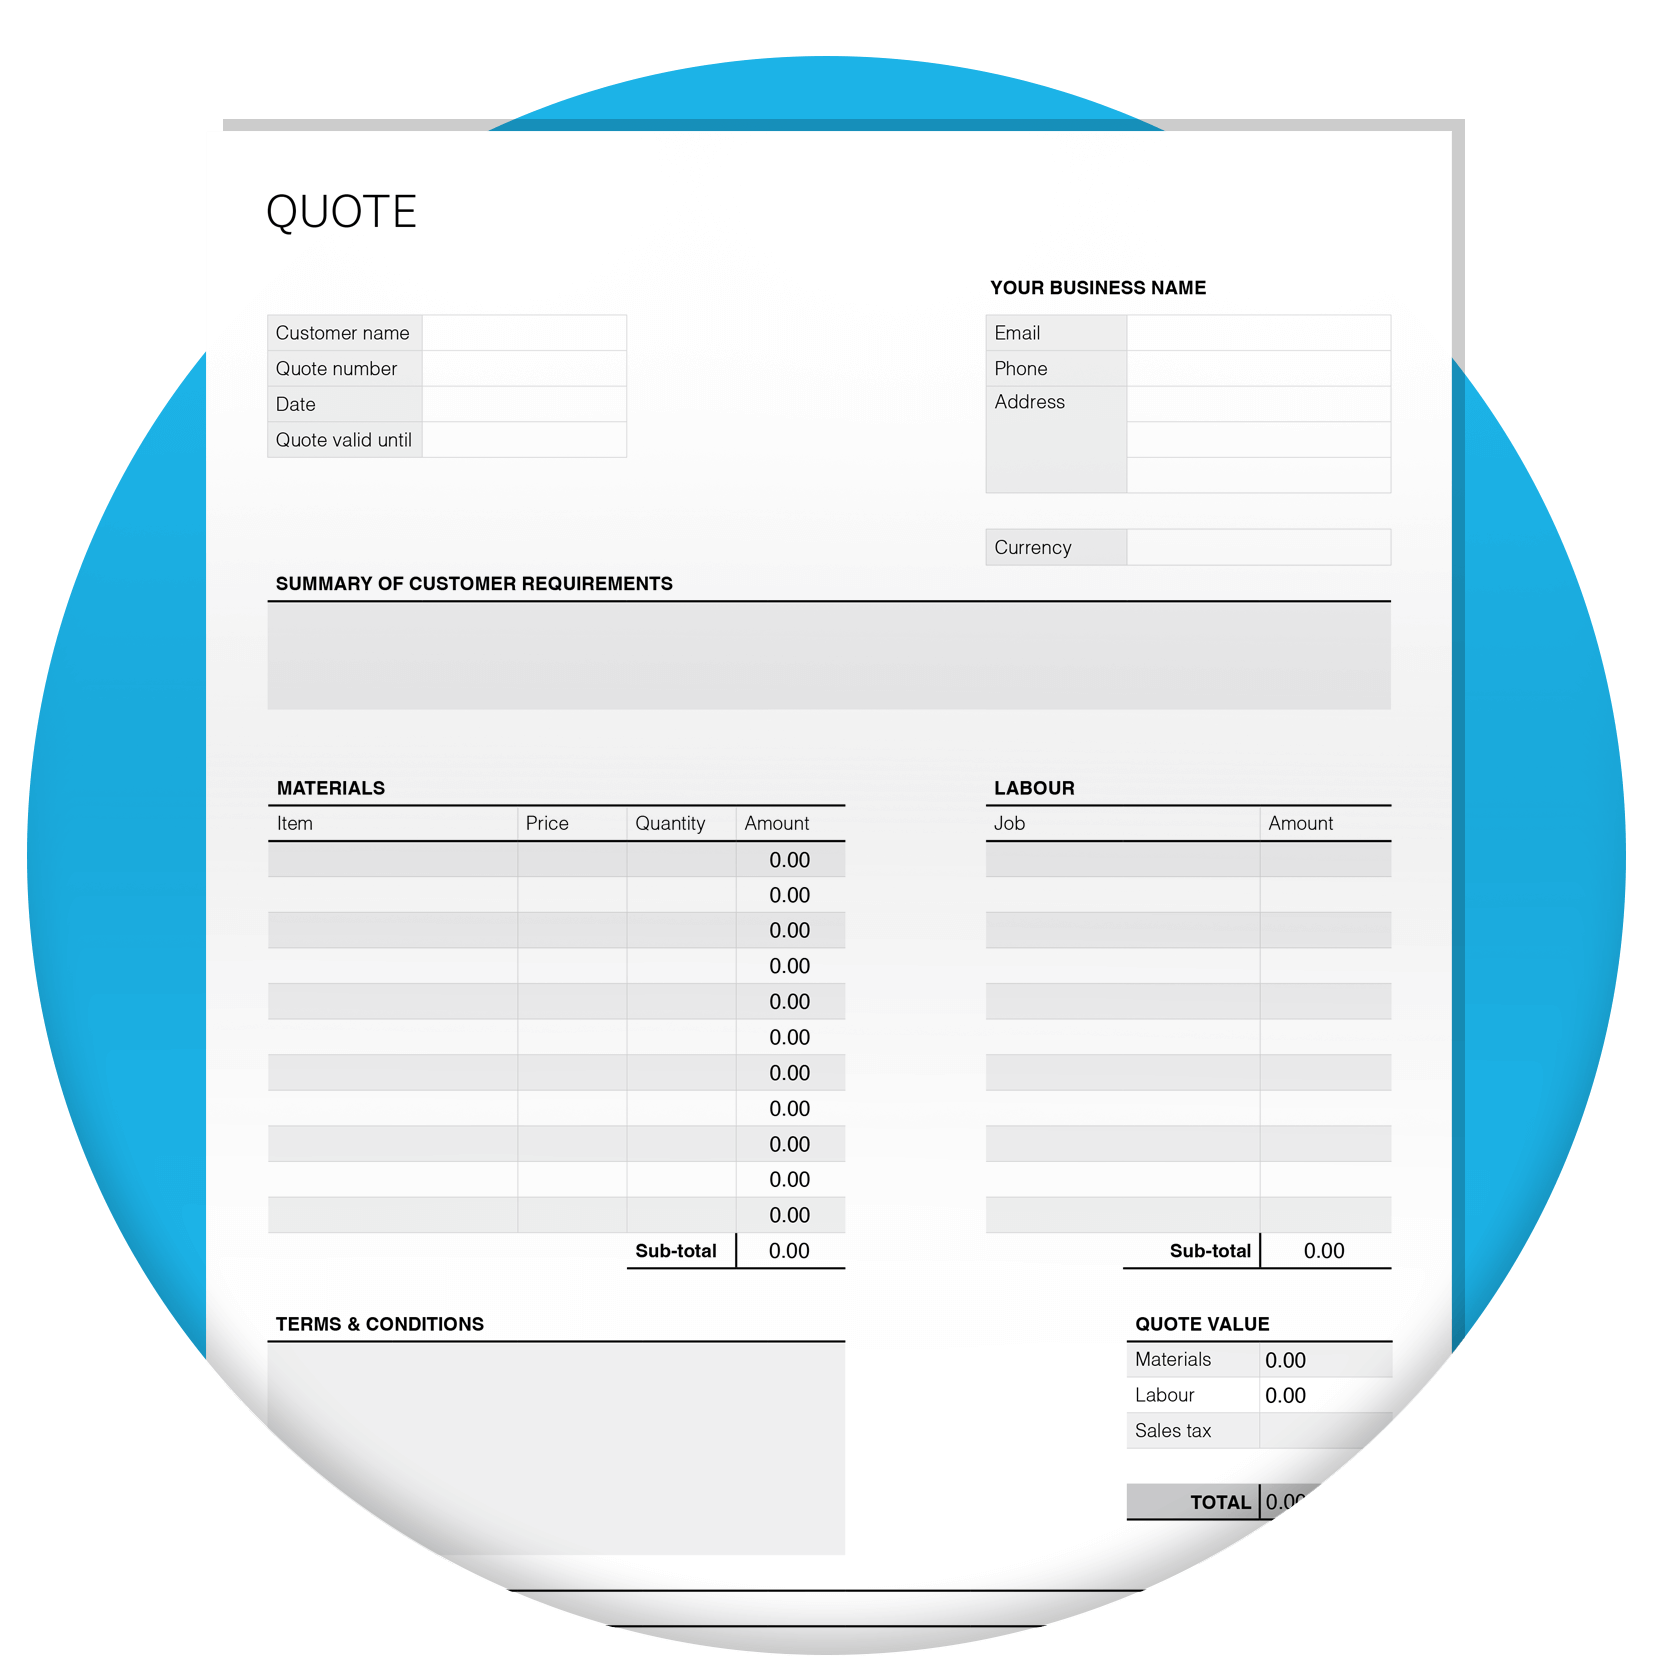 Construction quote template with blank fields for users to fill out.